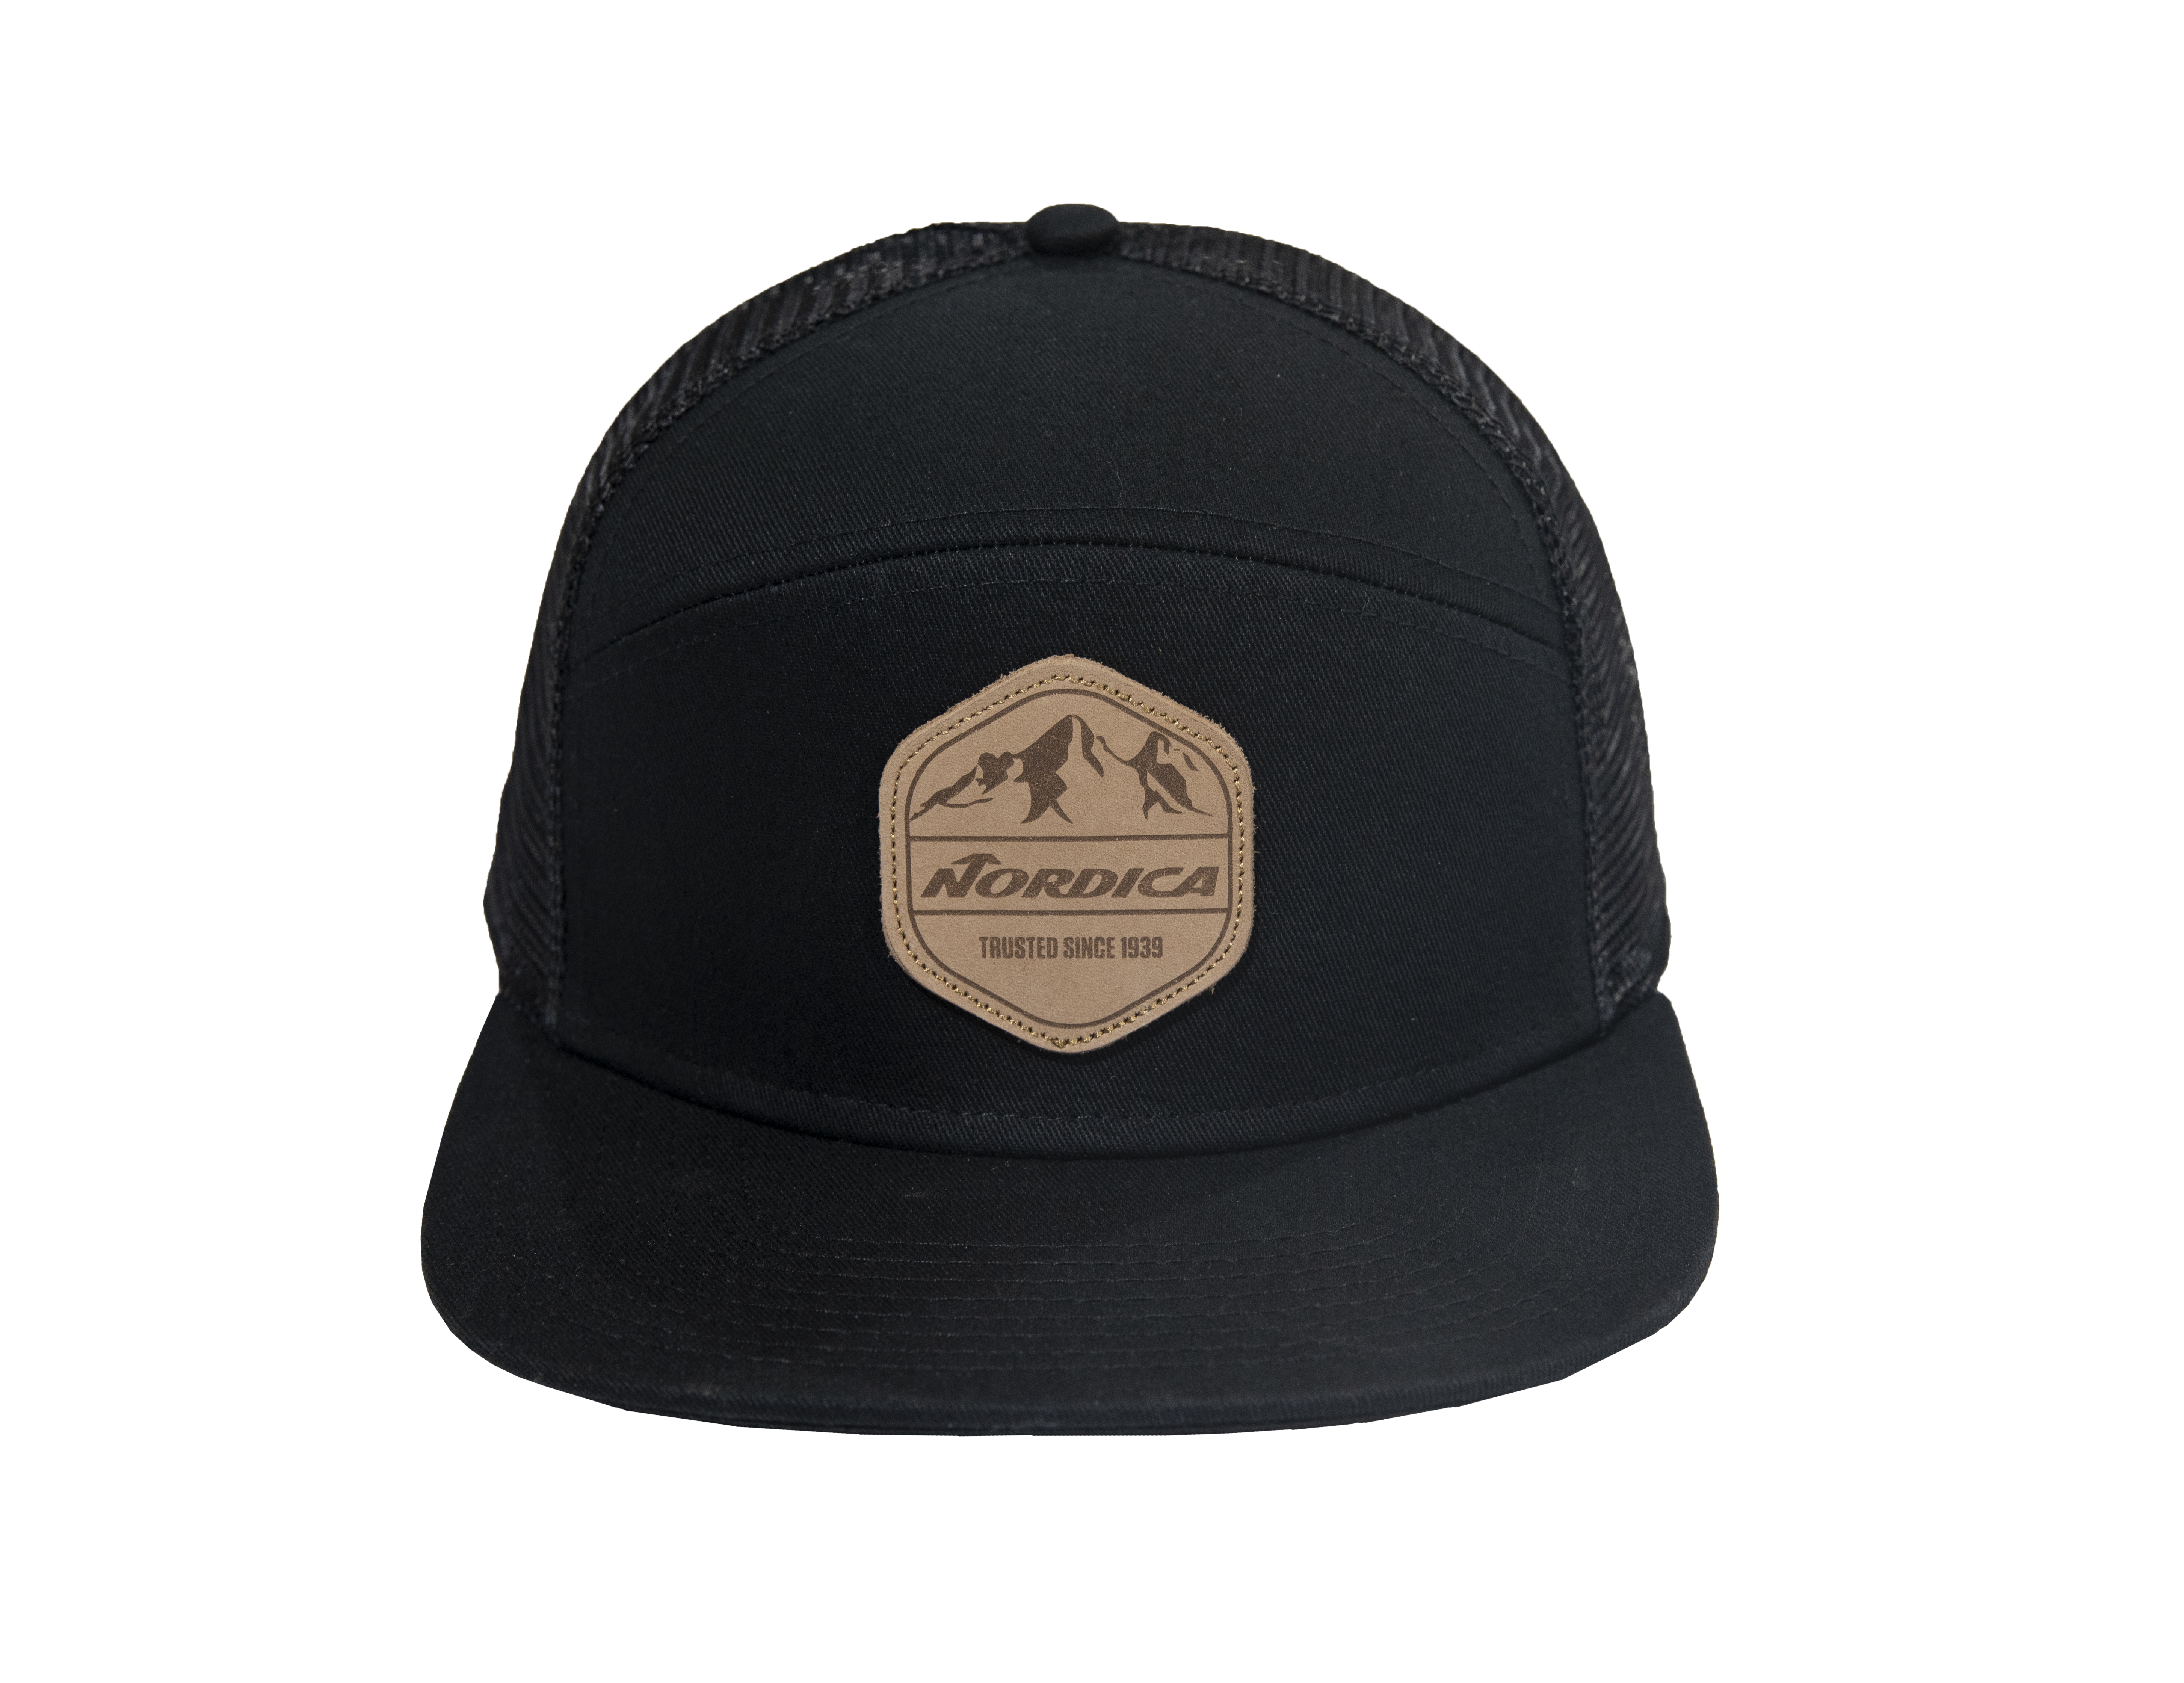 NORDICA LEATHER PATCH TRUCKER HAT